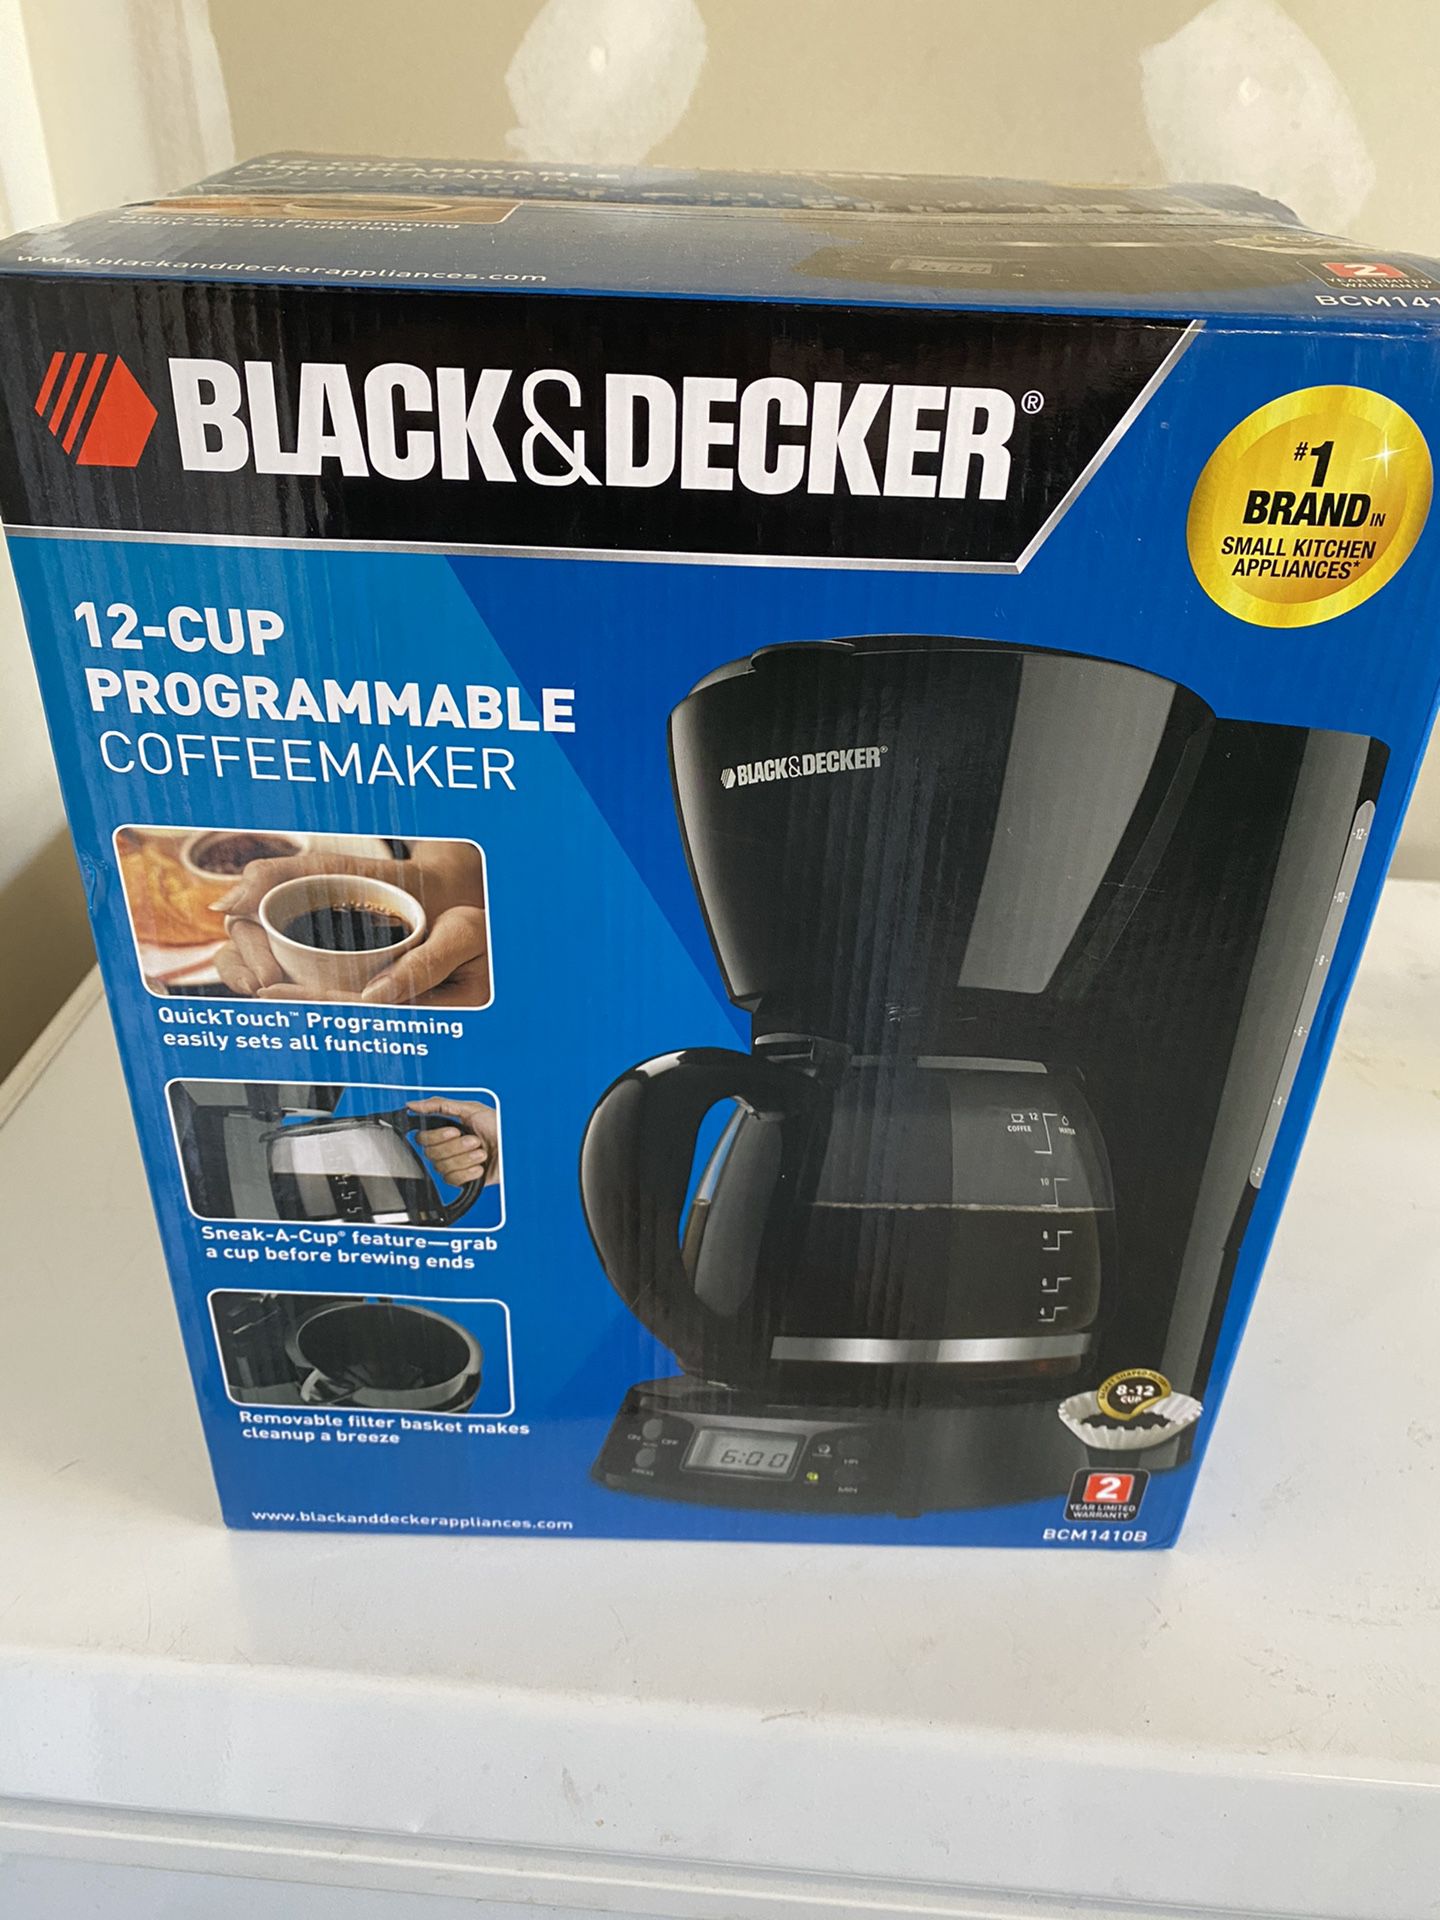 Brand new Black and Decker 12 Cup Programable Coffee maker